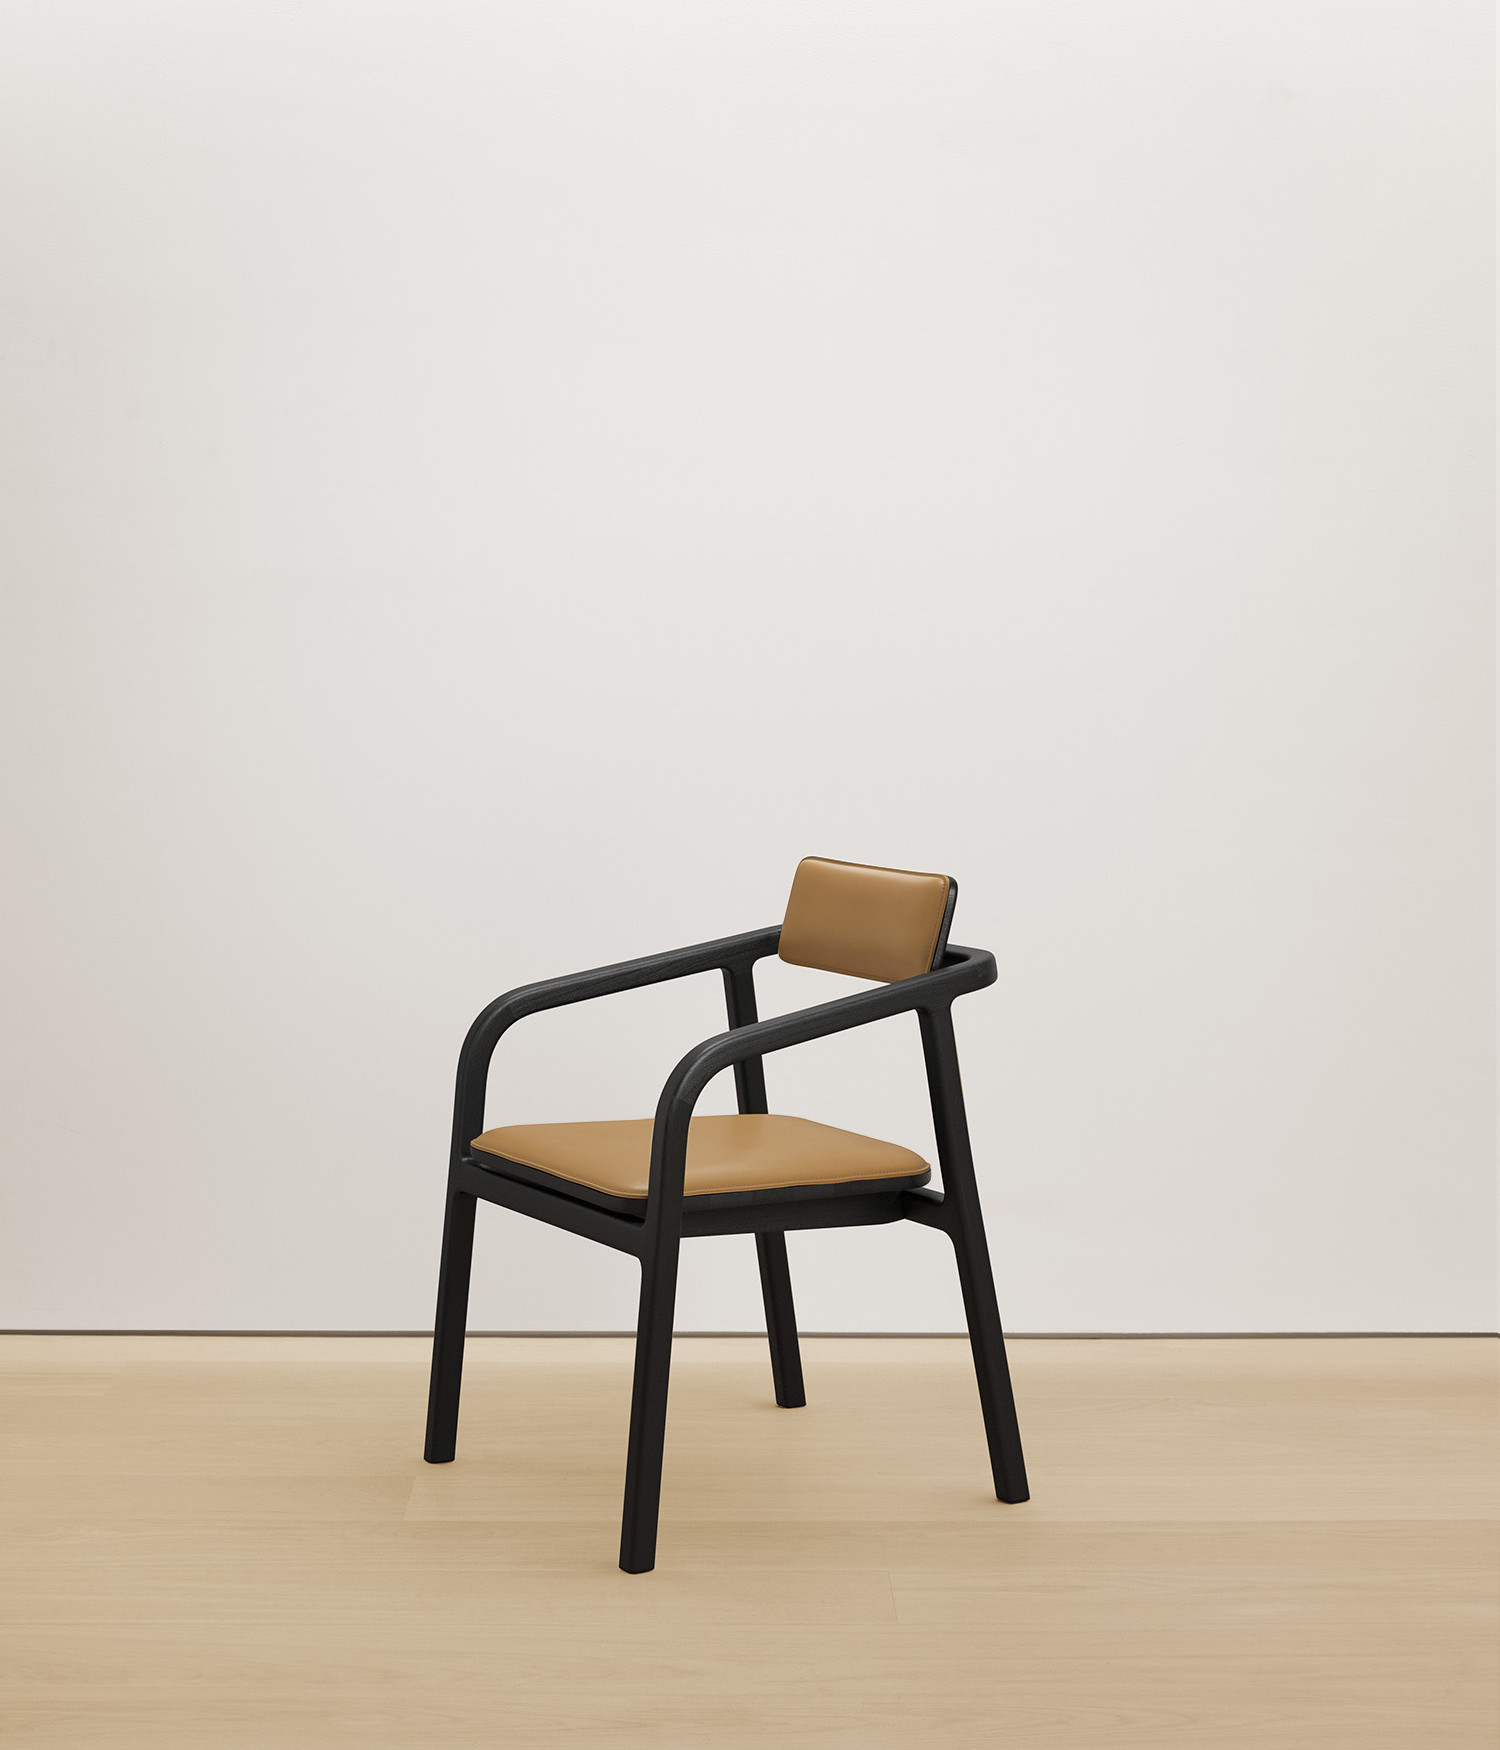  black-stained-oak chair with tan color upholstered seat 